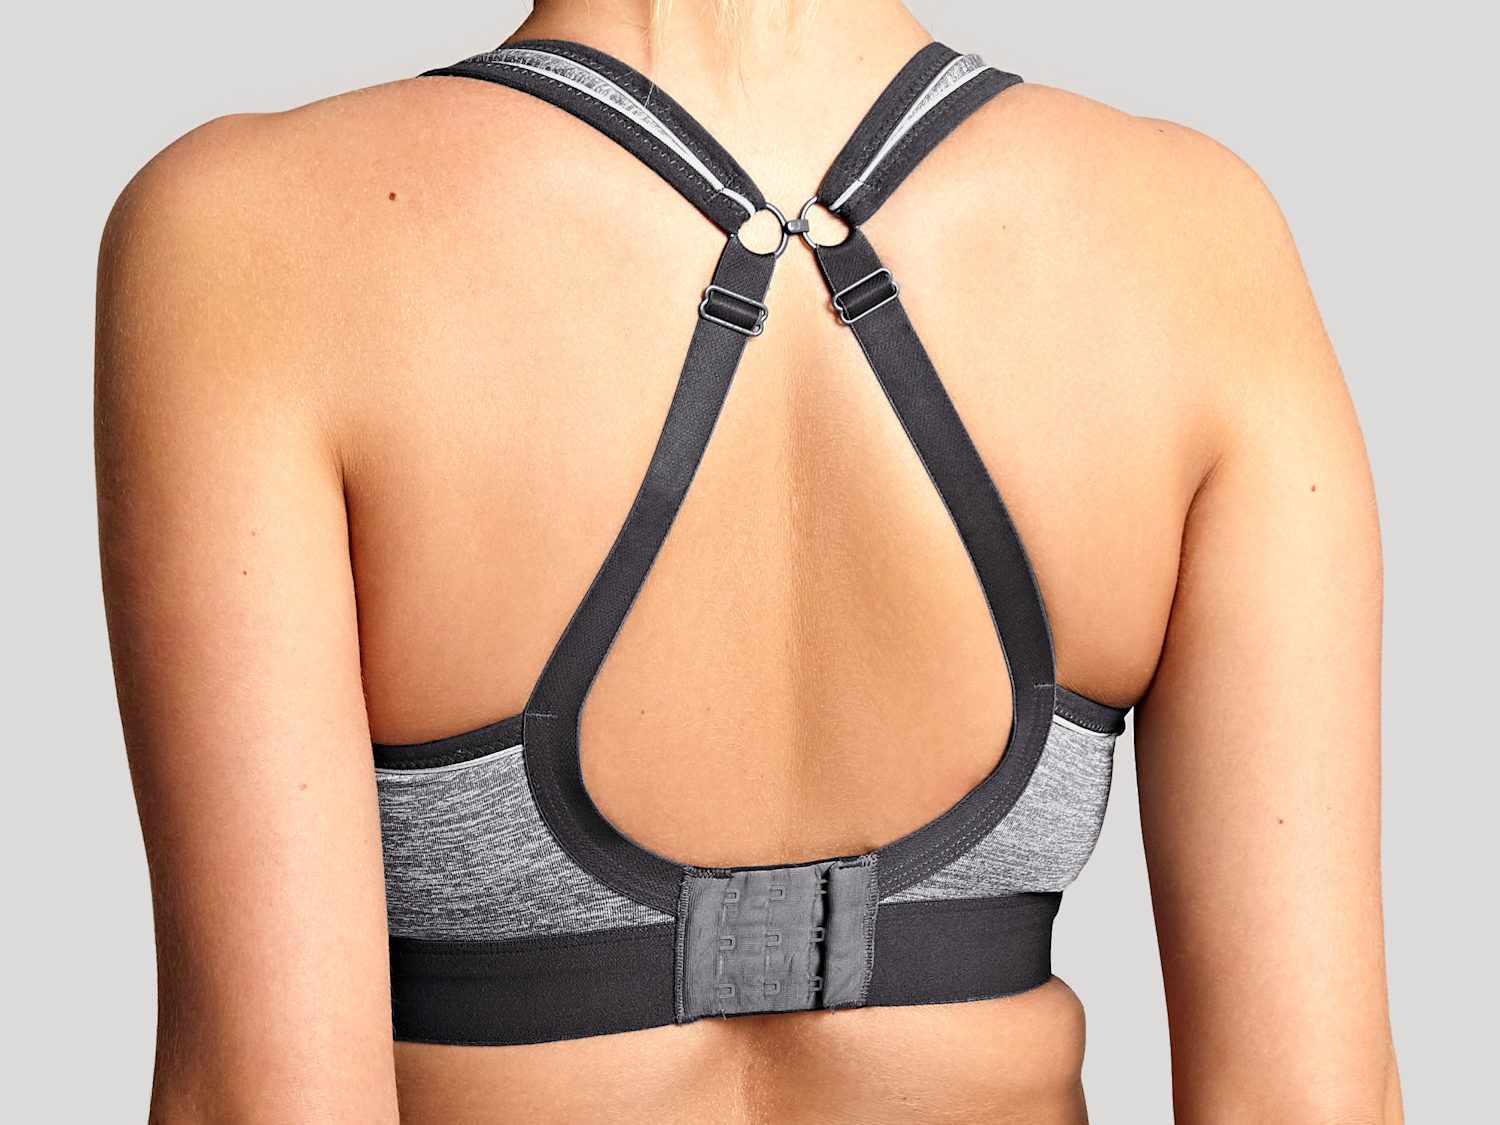 https://www.lumingerie.com/images/products/panache-sport-7341b-non-wired-sports-bra-charcoal-marl-b-racerback_orig.jpg